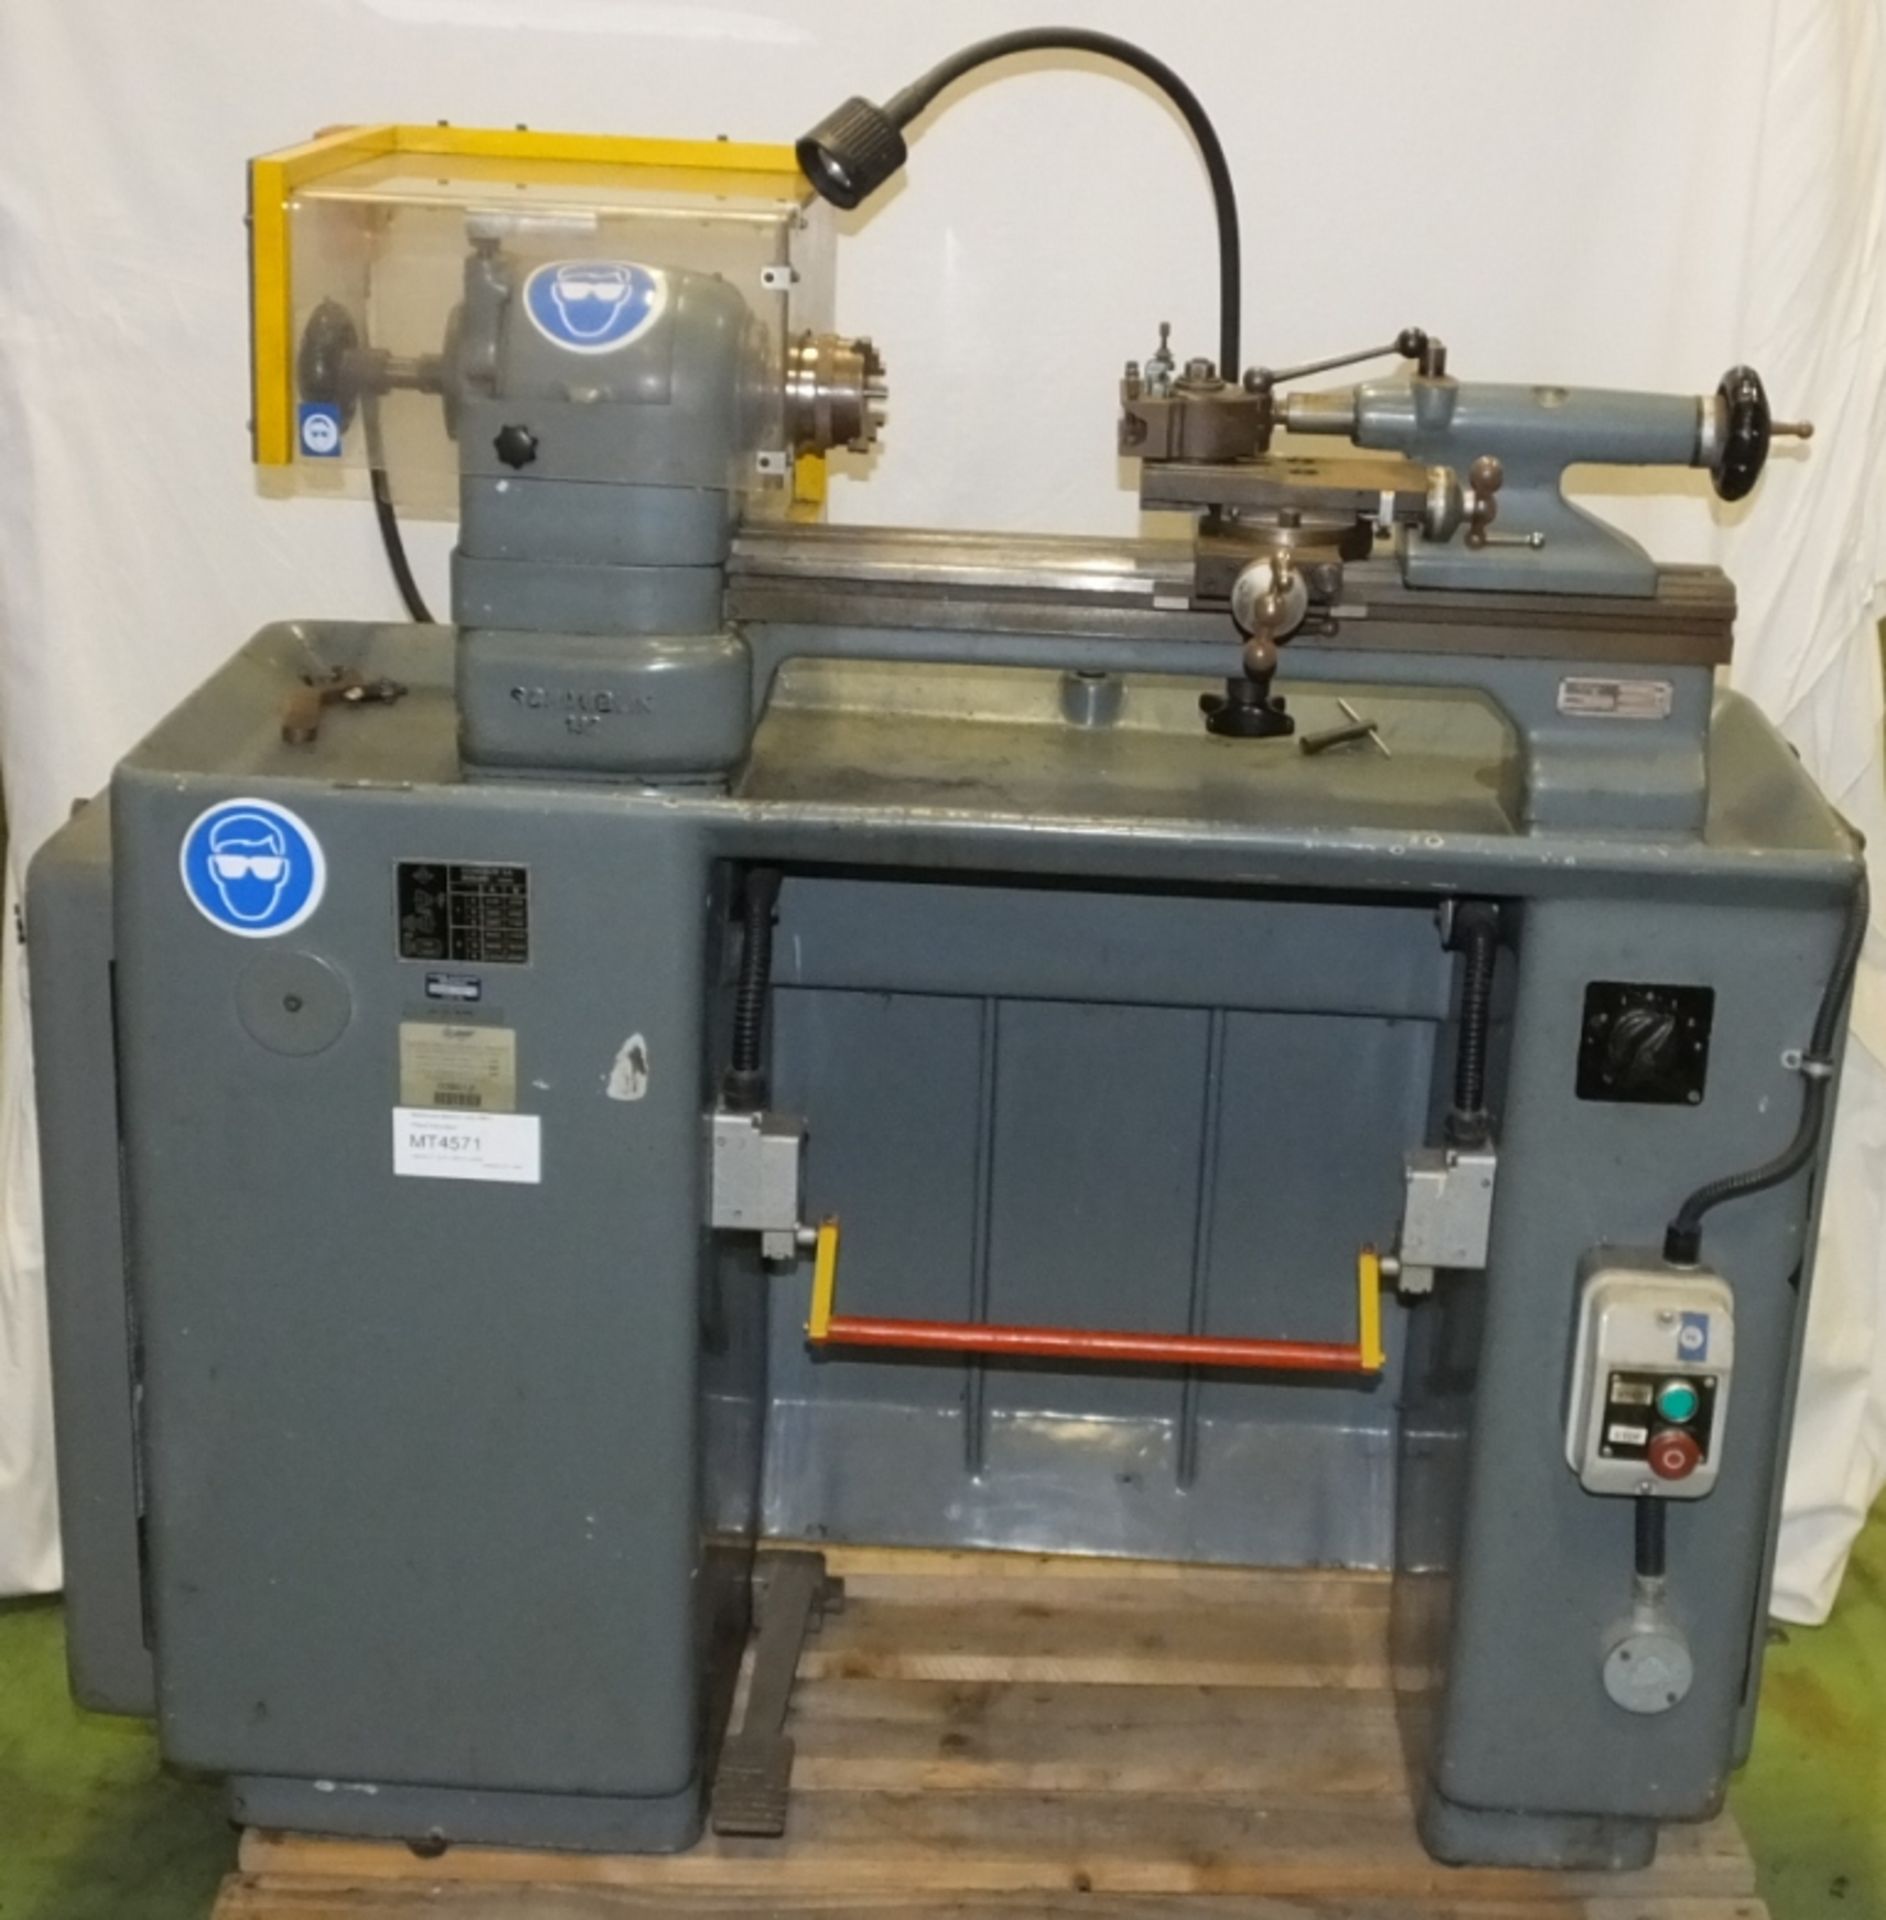 Schaublin S.A. Lathe Type 102-80 - 420V - Serial 250358 - £10 Loading Charge Applied to th